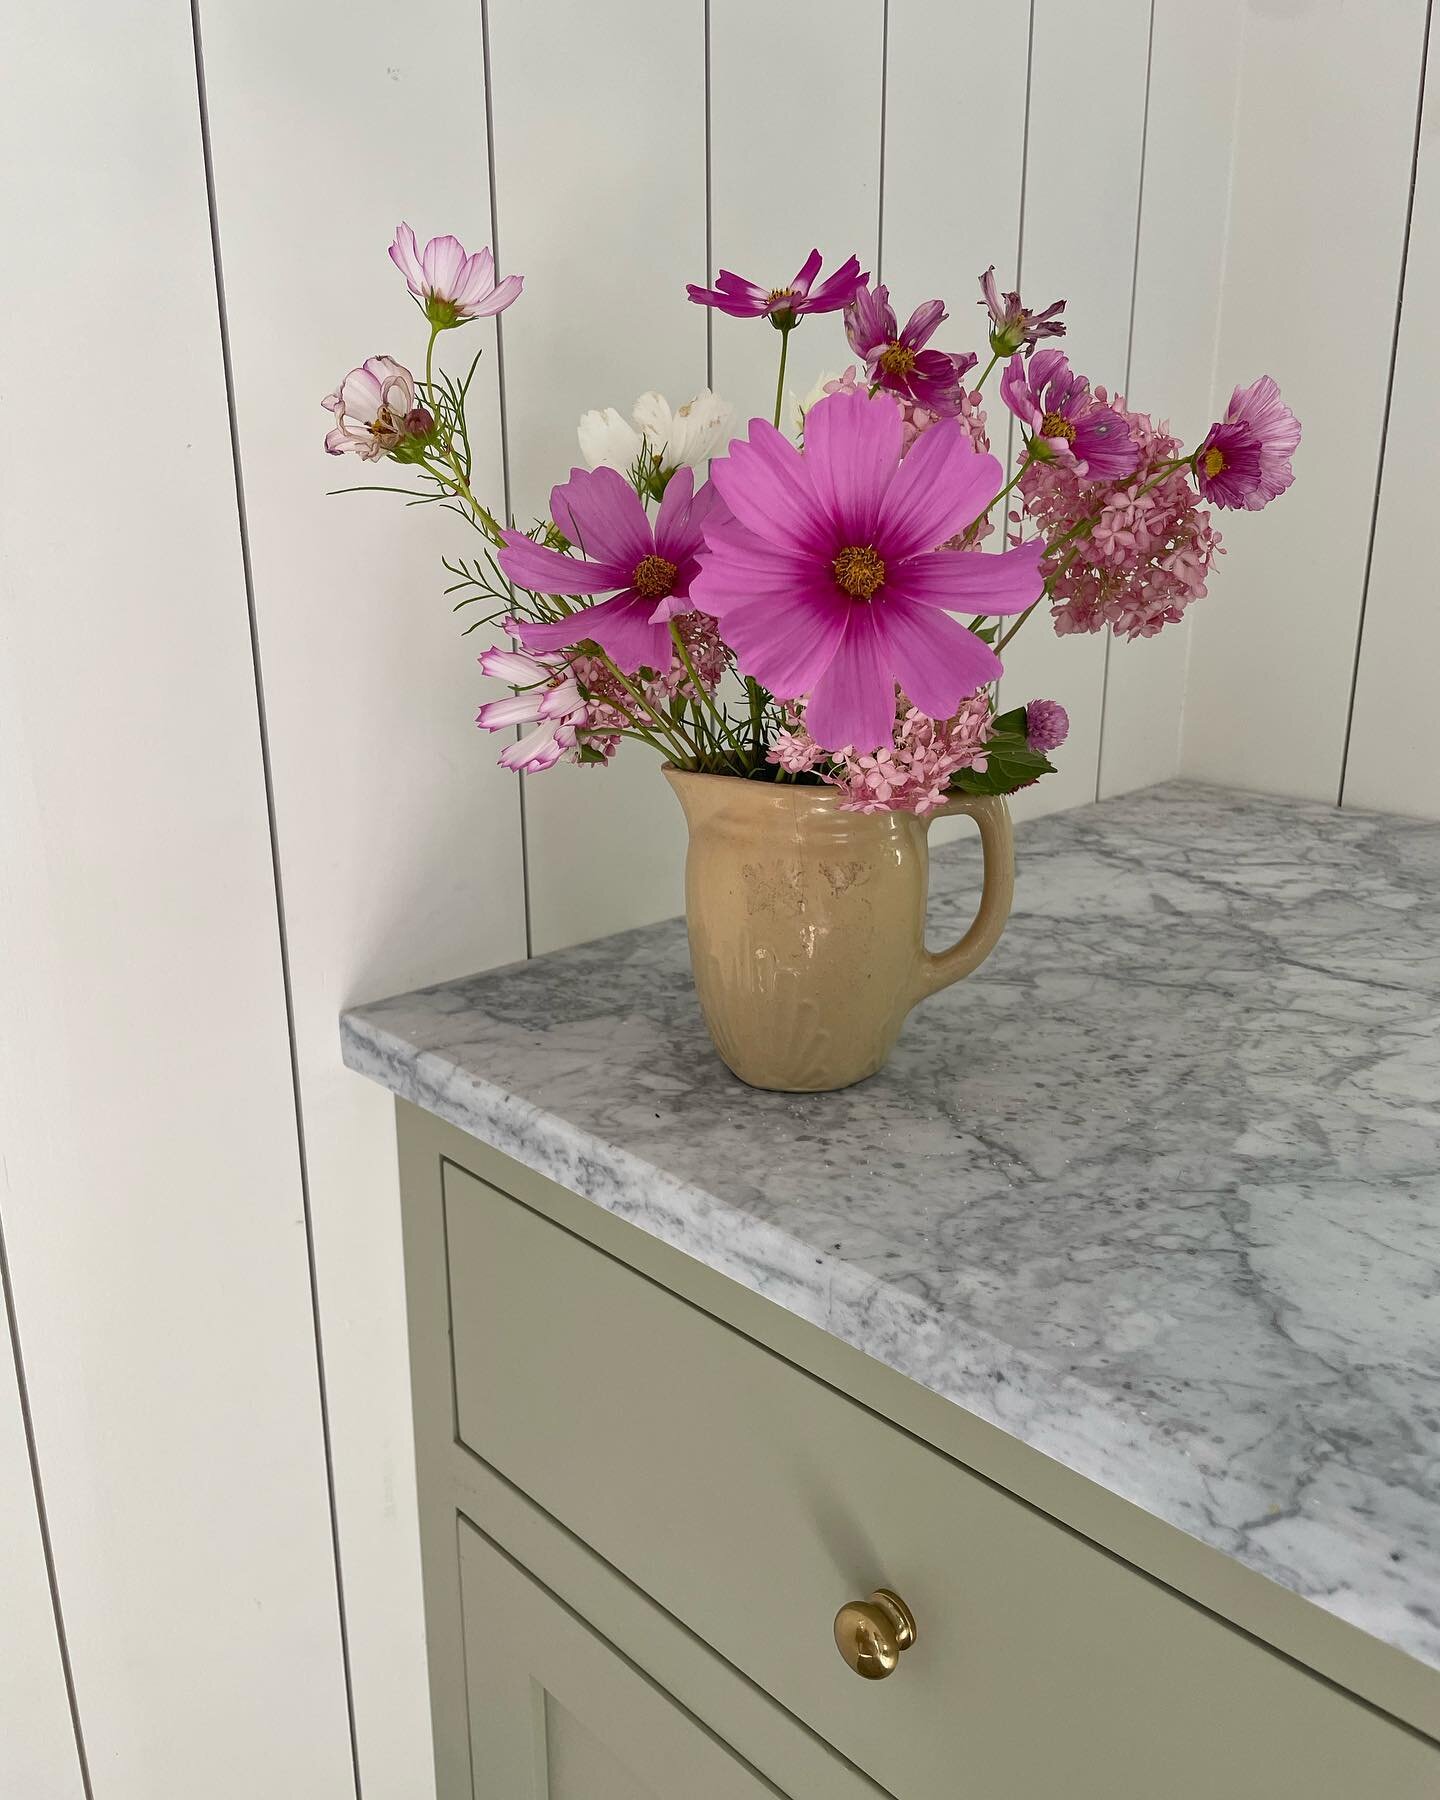 Fresh Flowers

Flowers in the kitchen always make me happy especially when you can cut them from your flower beds. Hydrangeas and cosmos &hellip; I love you ! 

Happy Thursday to You 🤍
.
.
.
.
#flowersbyfig 
#figdesigncompany
#flowers
#flower
#kitch